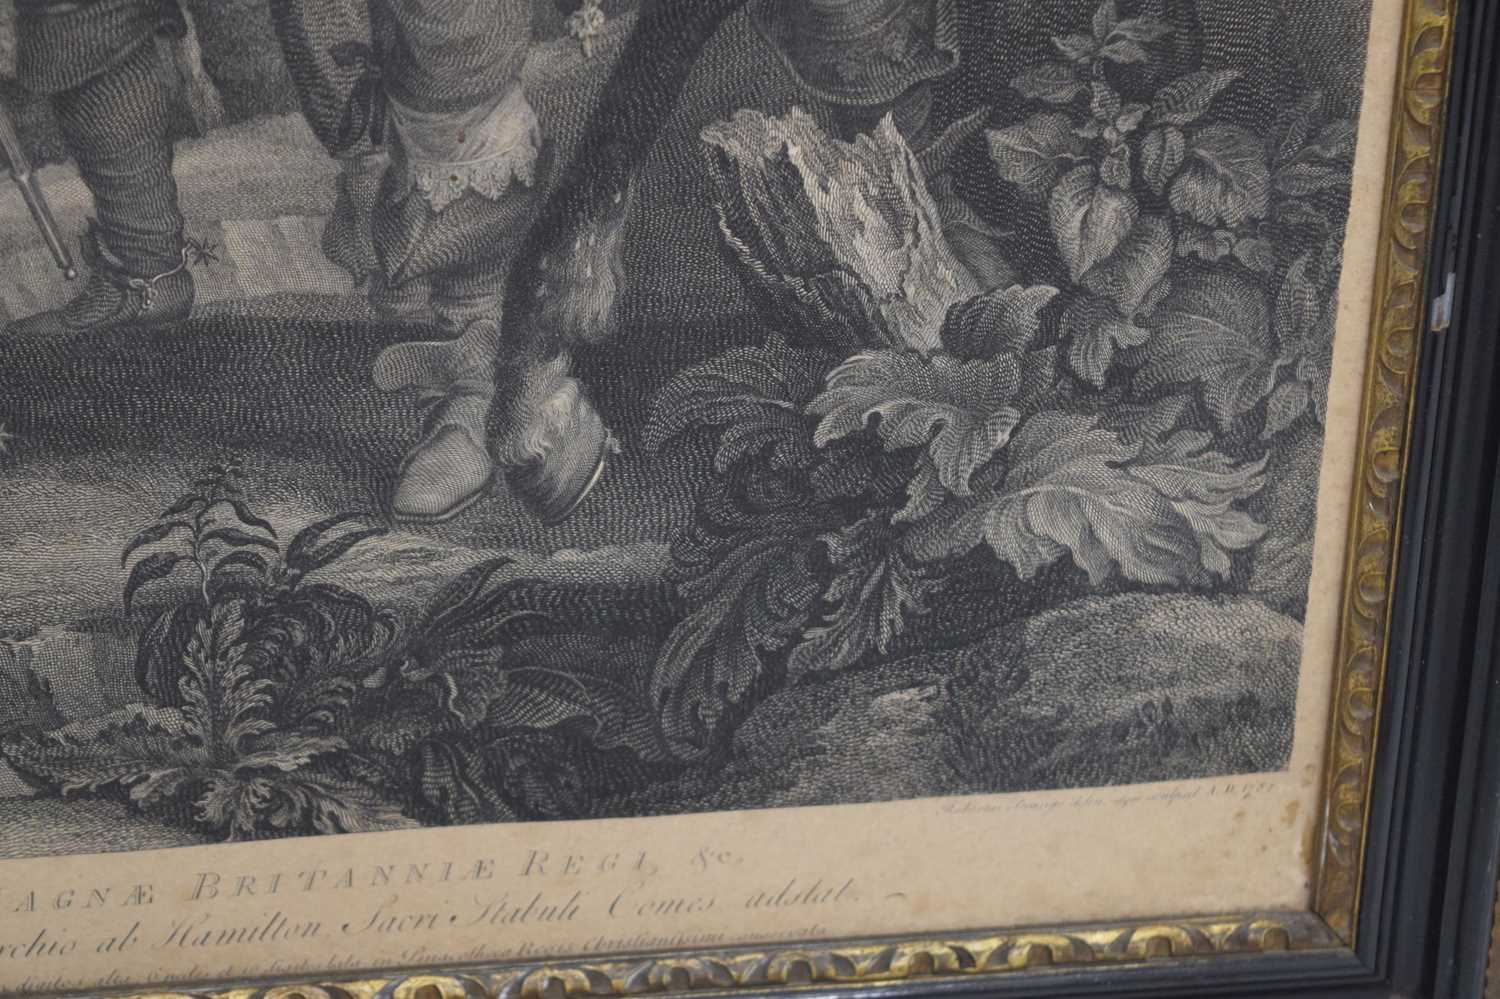 After Anthony van Dyck - Late 18th century engraving - Charles I - Image 3 of 10